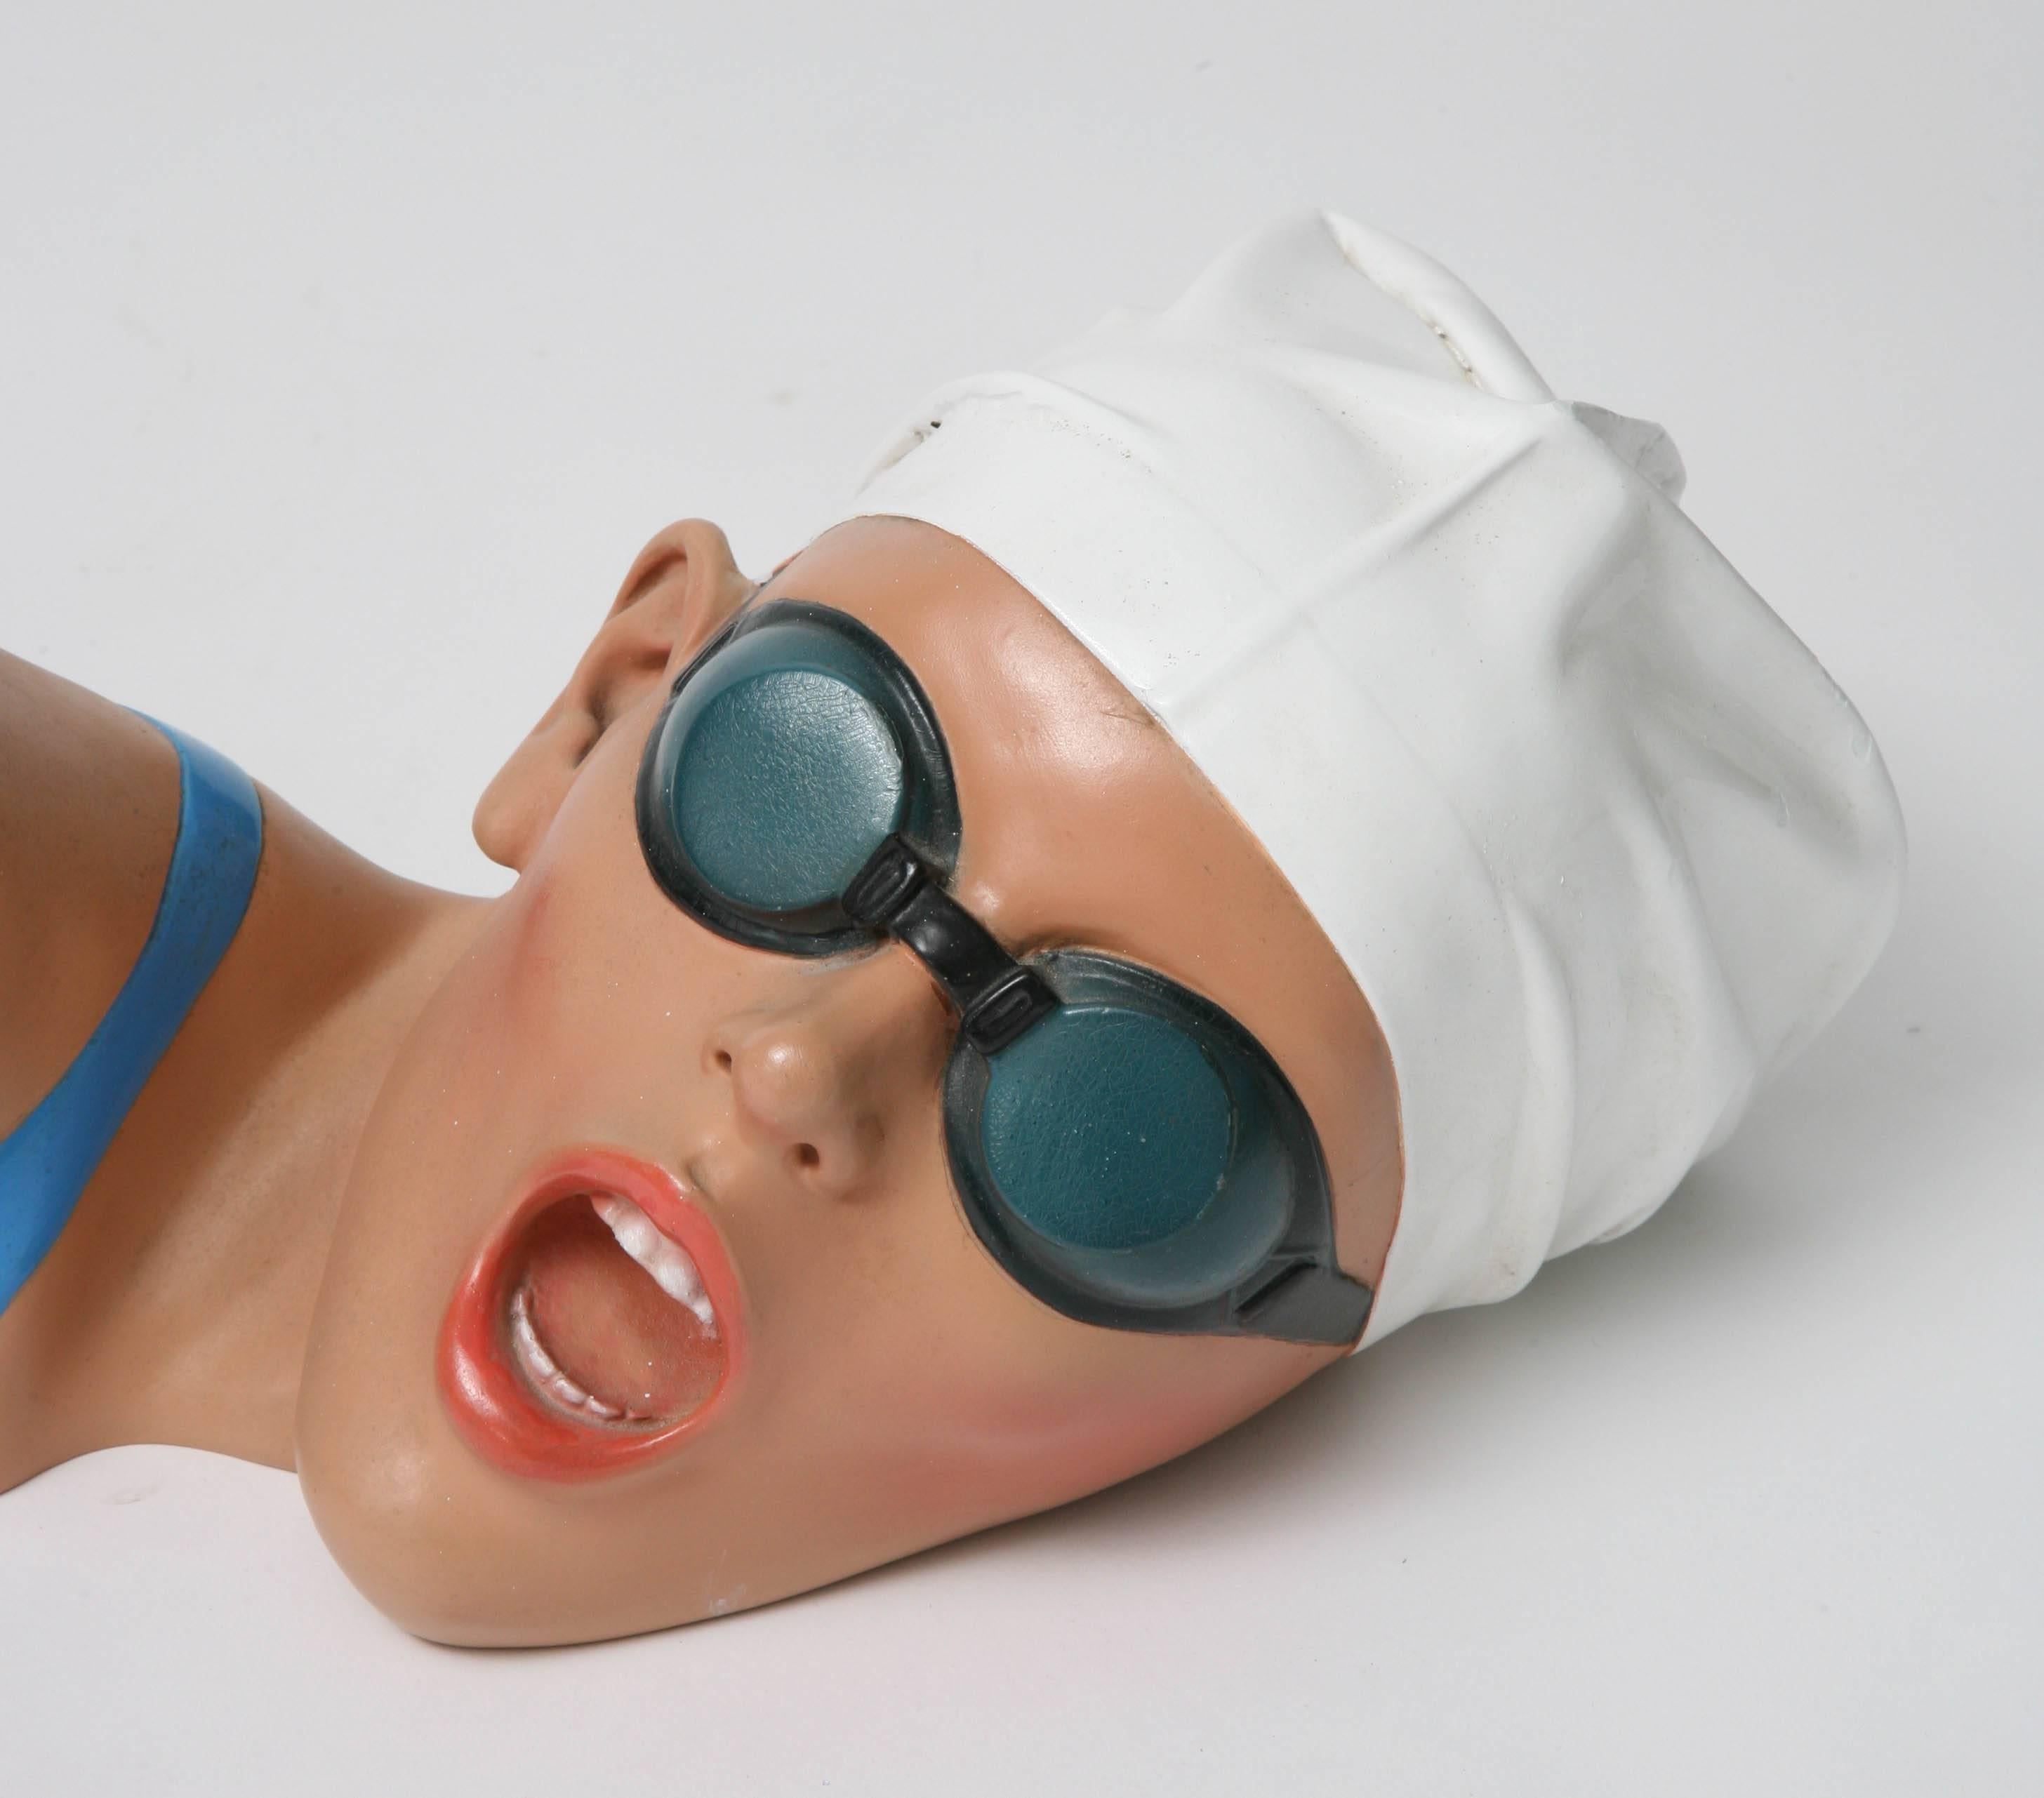 Modern Life-Like Sculpture of a Swimming Woman in the Style of Carole A. Feuerman